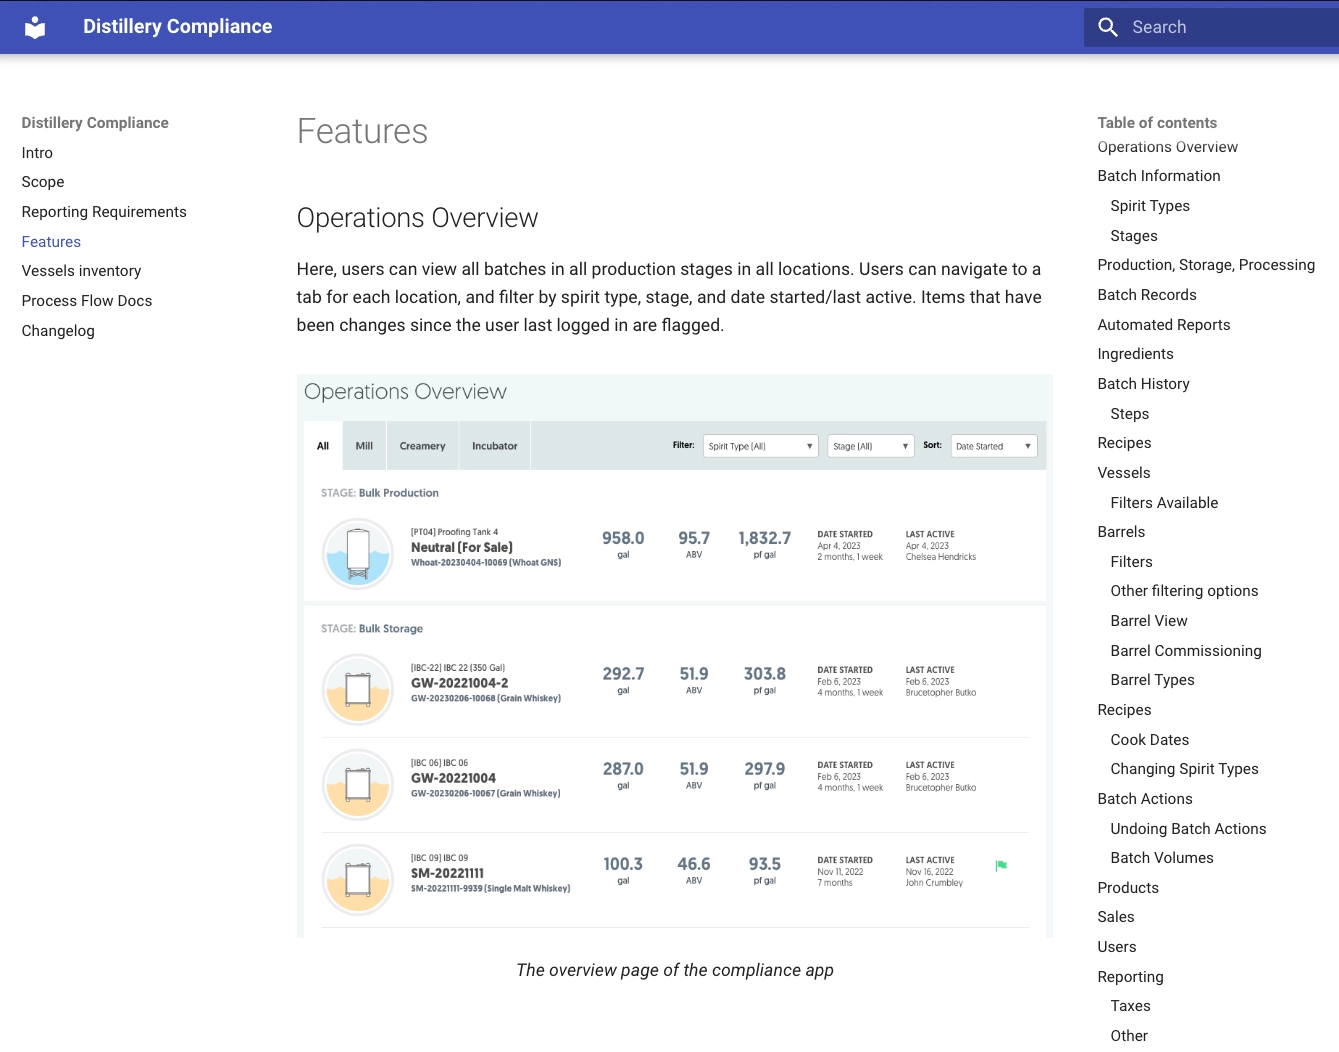 Features of the compliance app, with an overview of the UI